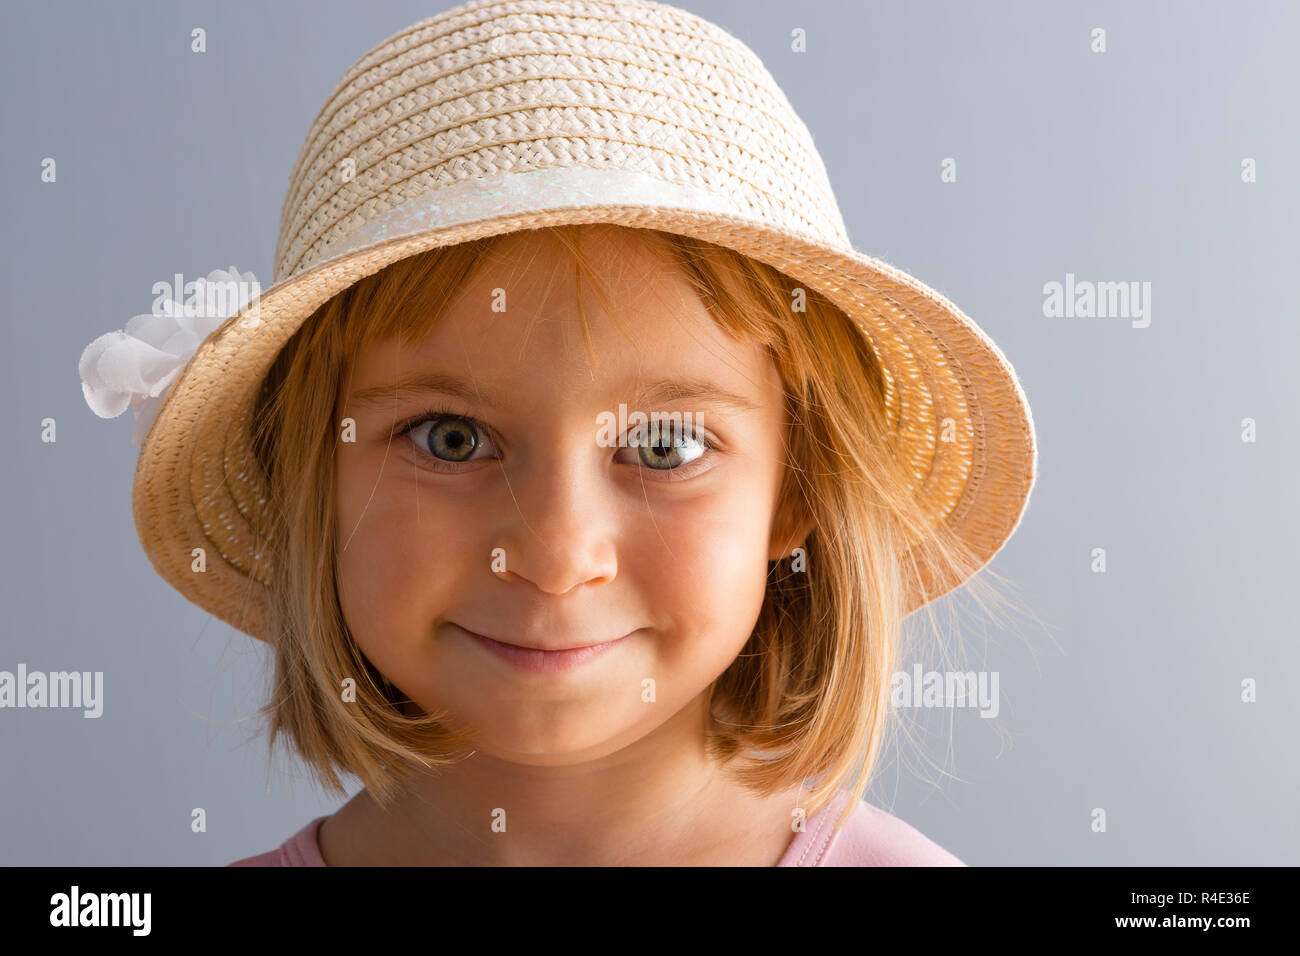 Adorable little four year old blond girl with huge green eyes smiling happily at the camera wearing a trendy straw hat Stock Photo